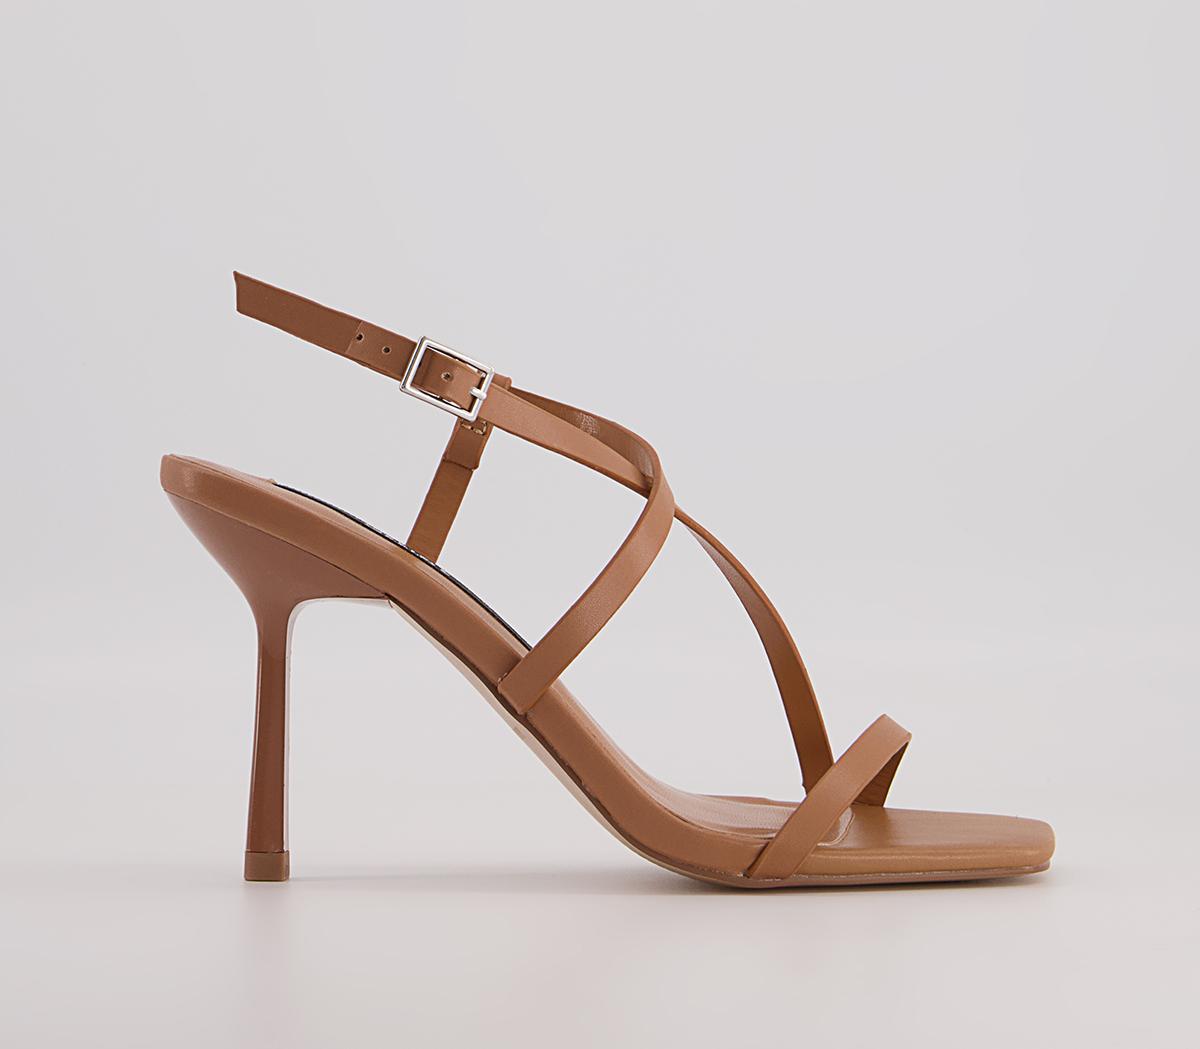 OFFICEMalorie Strippy Heeled SandalsCamel